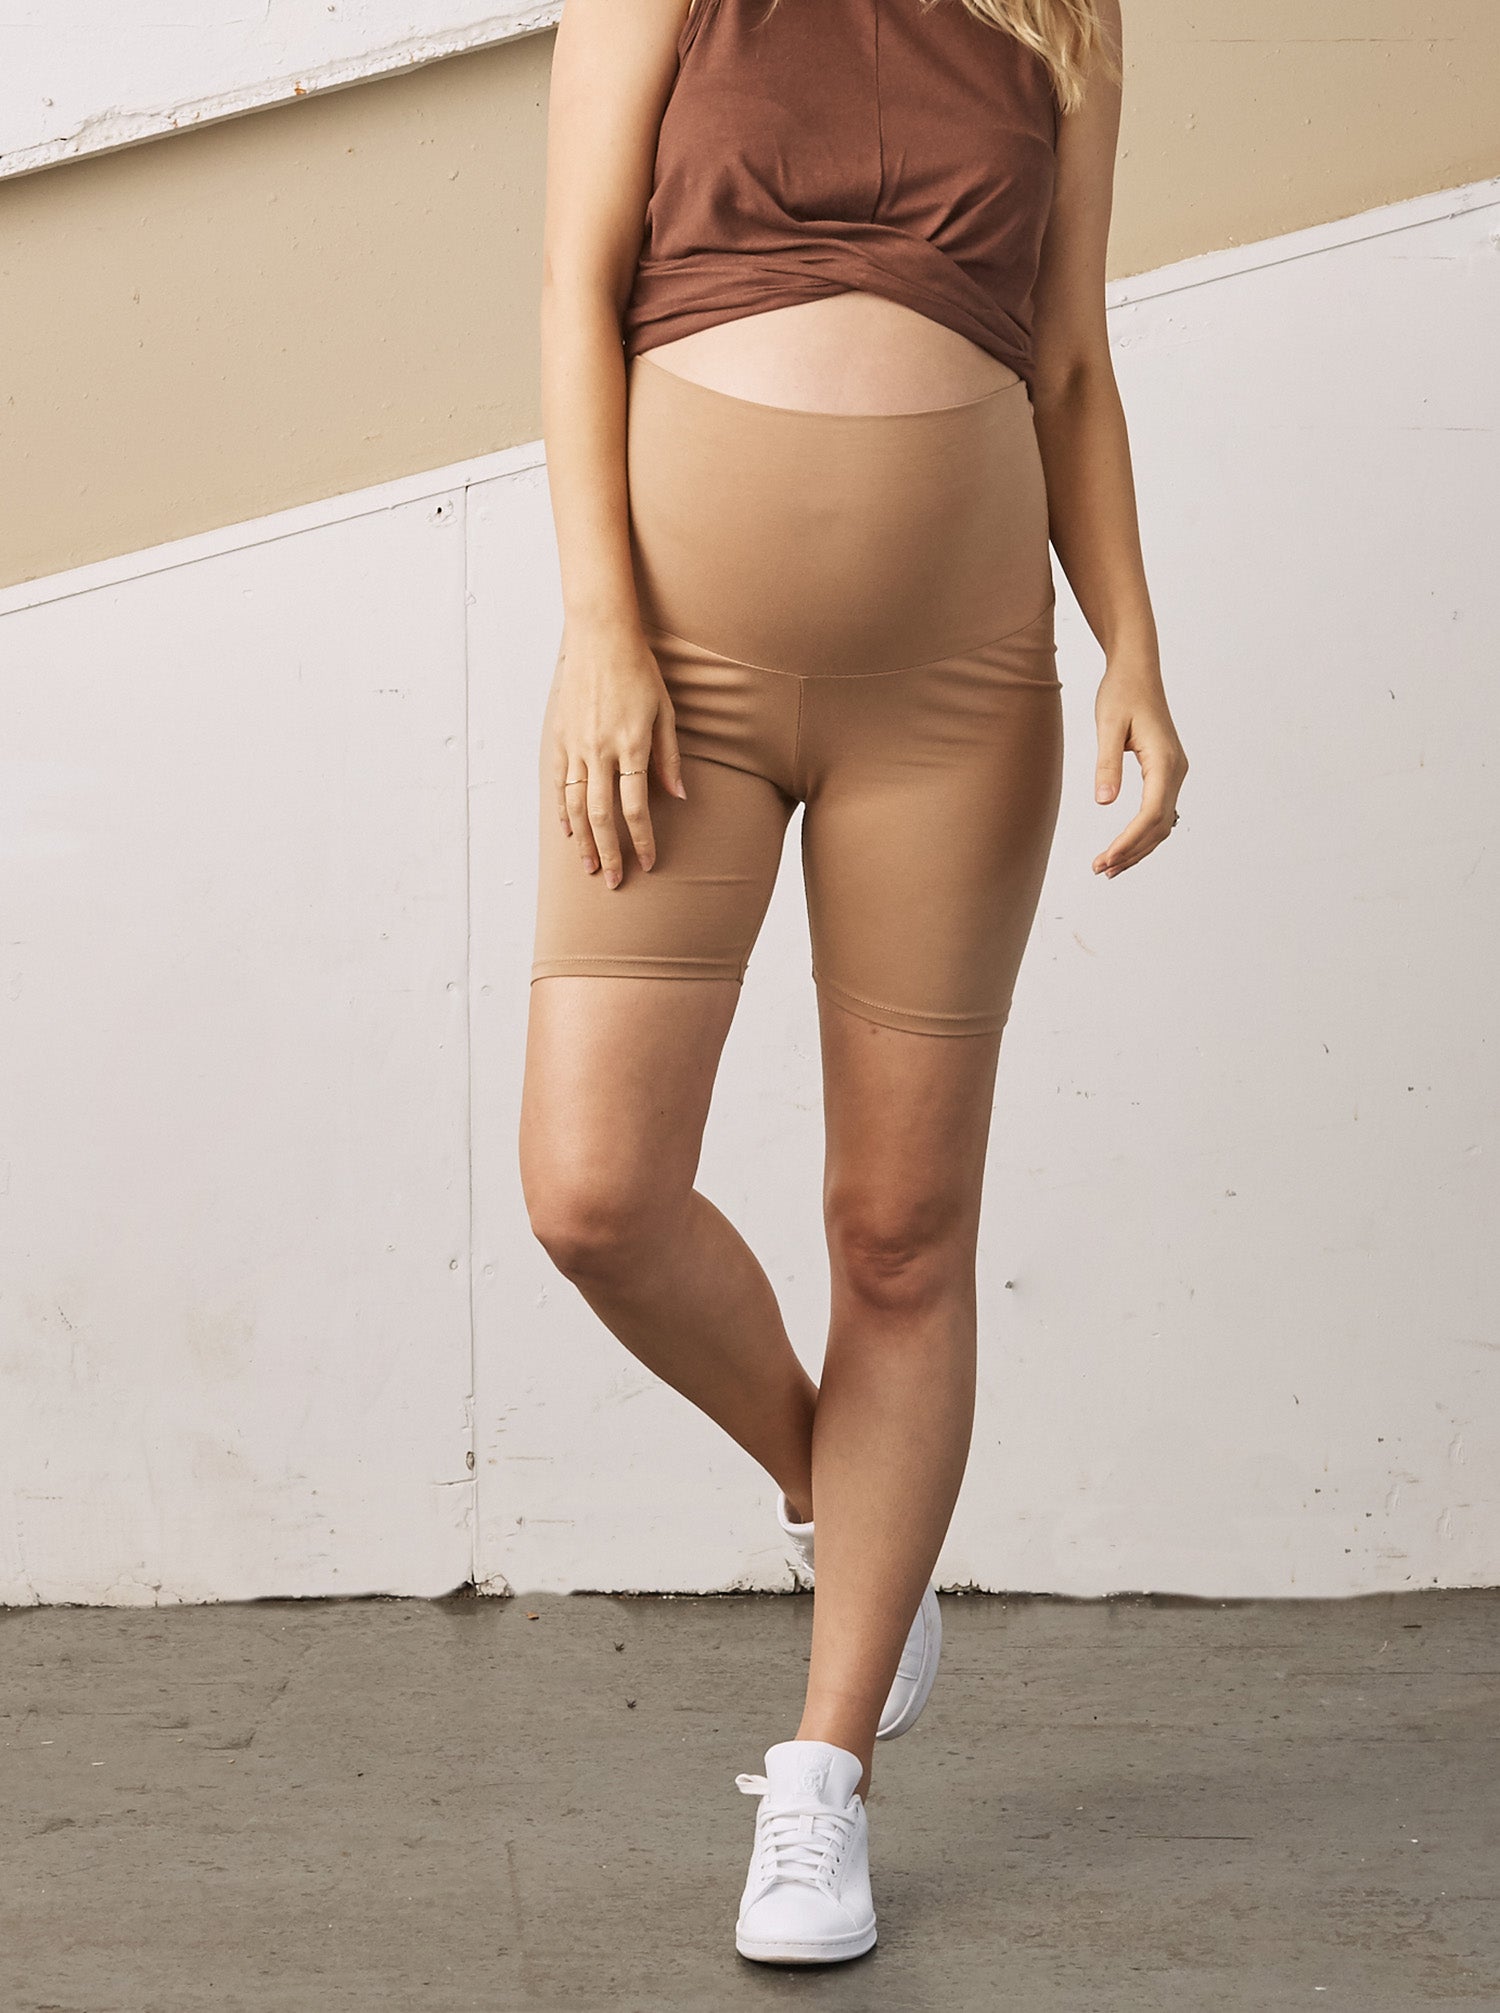 Maternity Activewear > Maternity Comfort Cotton Bike Shorts in